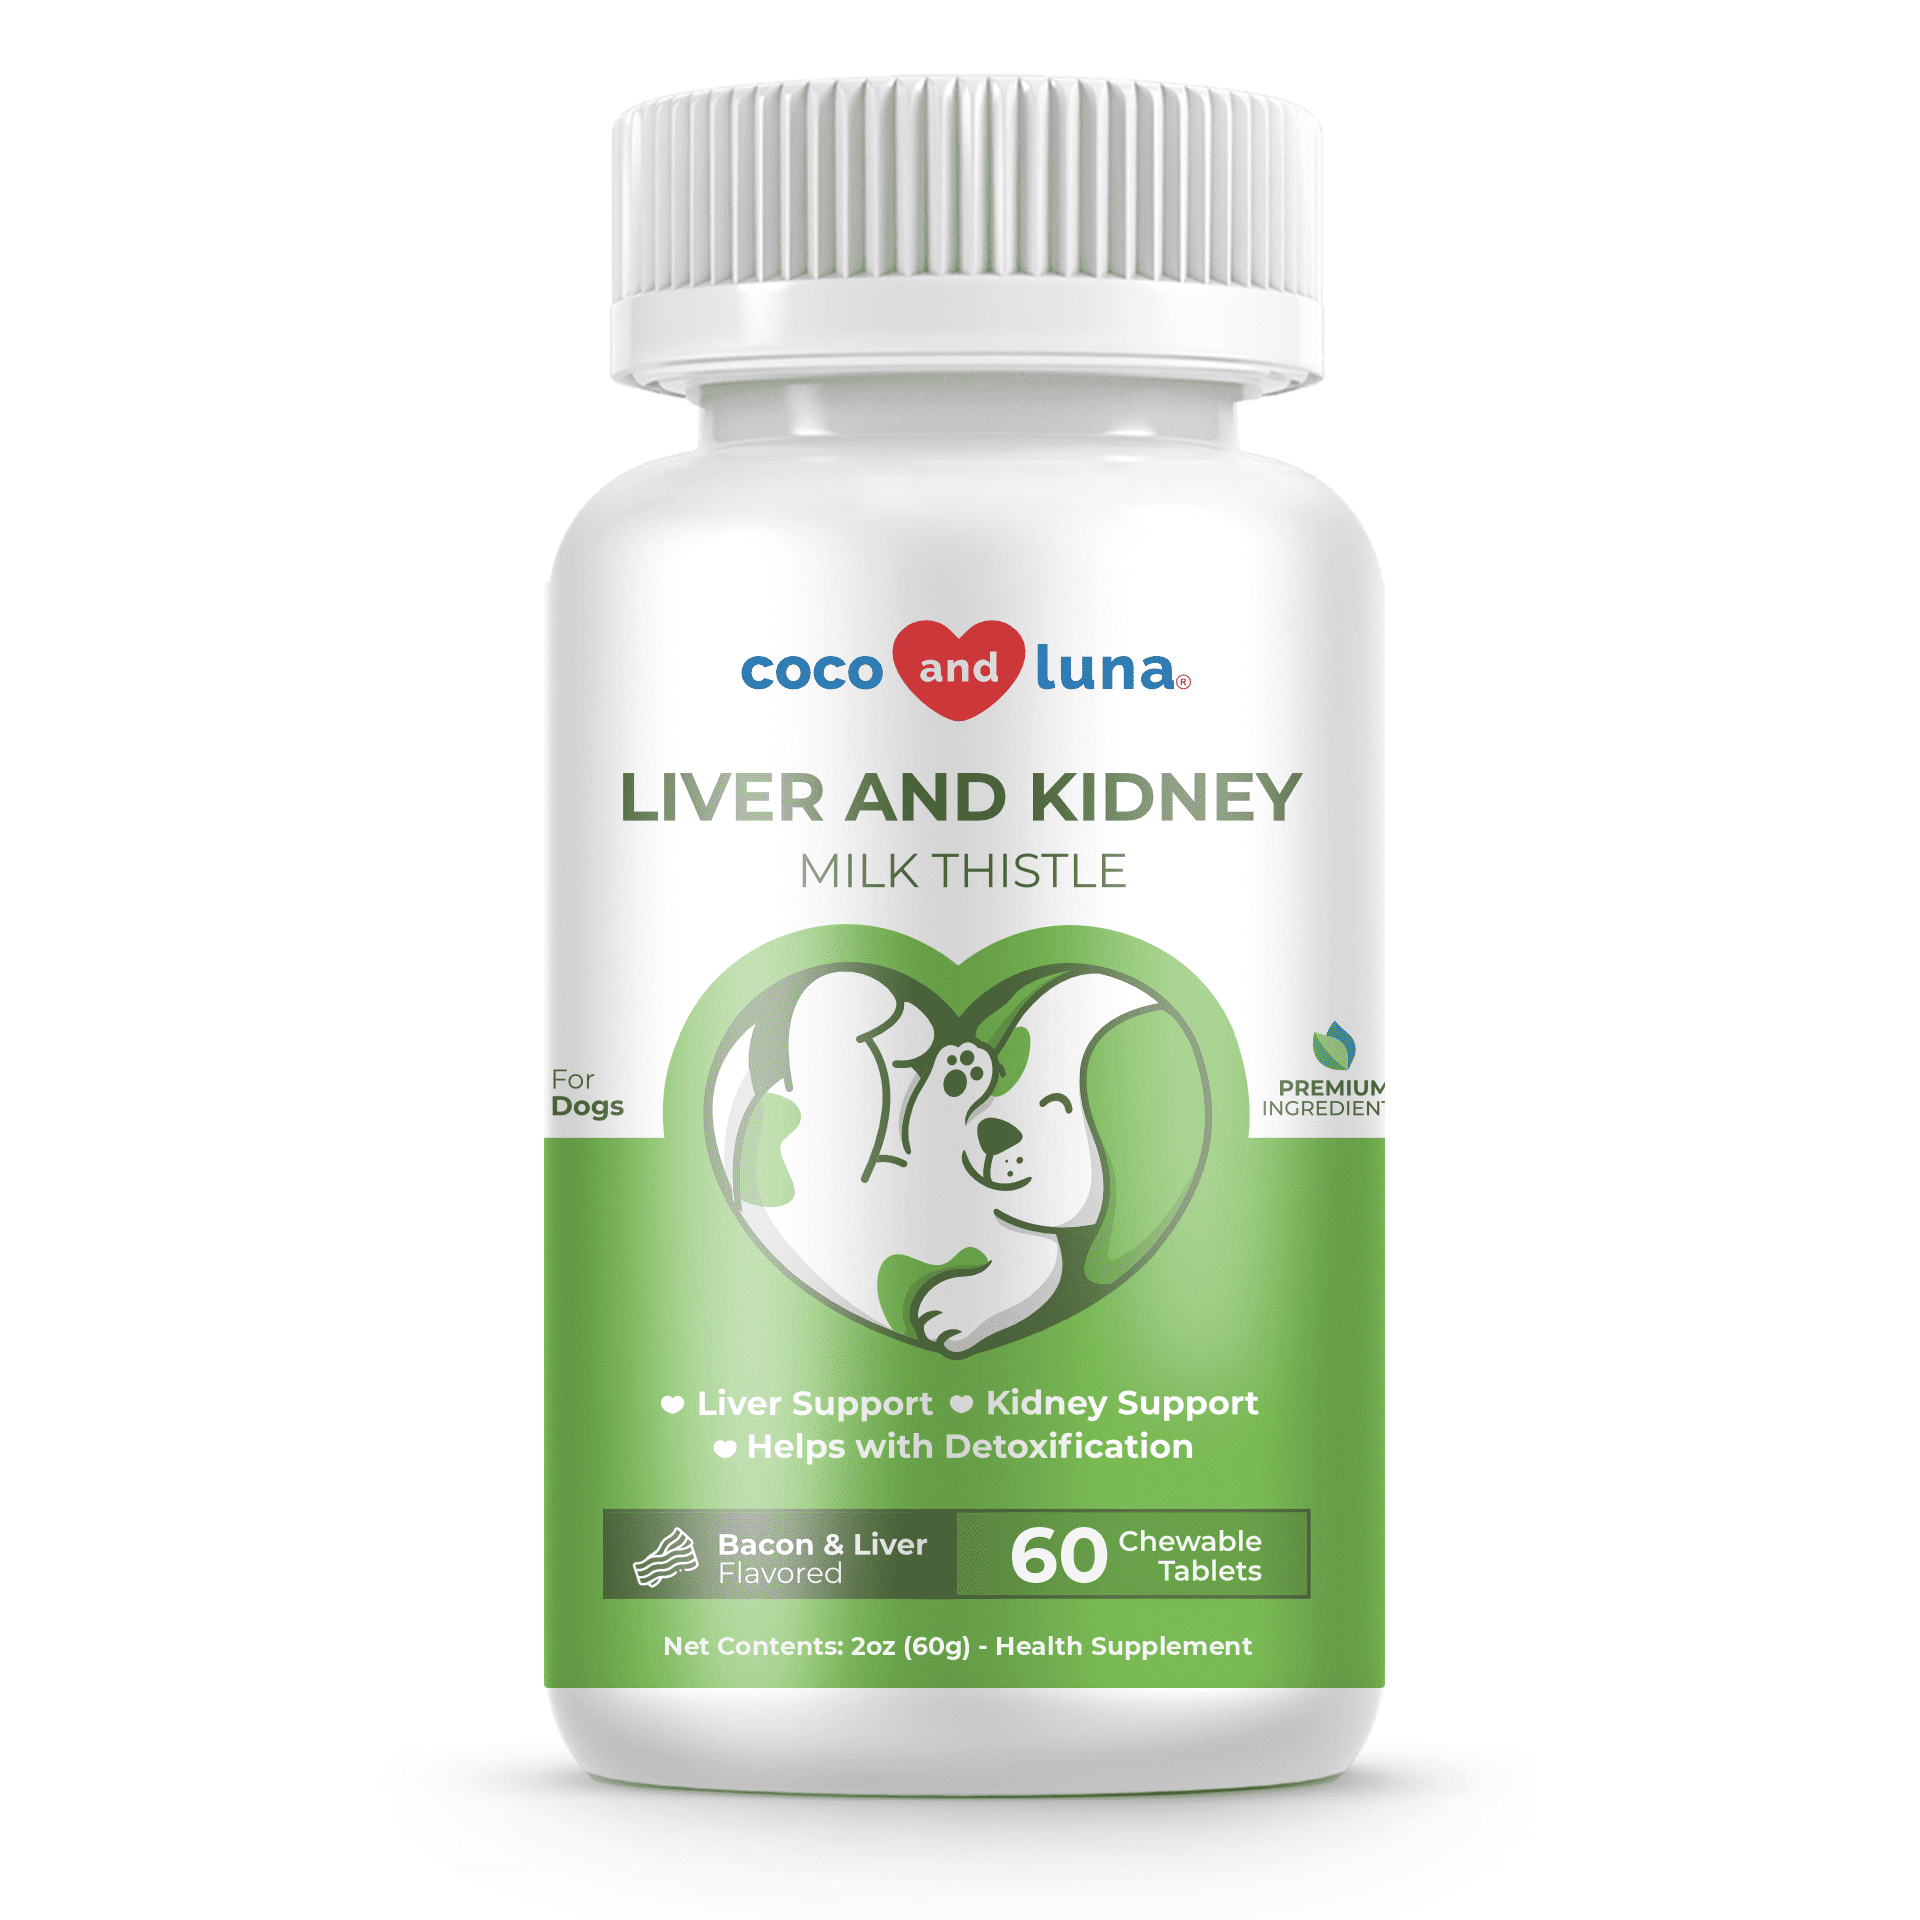 Liver and Kidney for Dogs - 60 Chewable Tablets - Coco and Luna